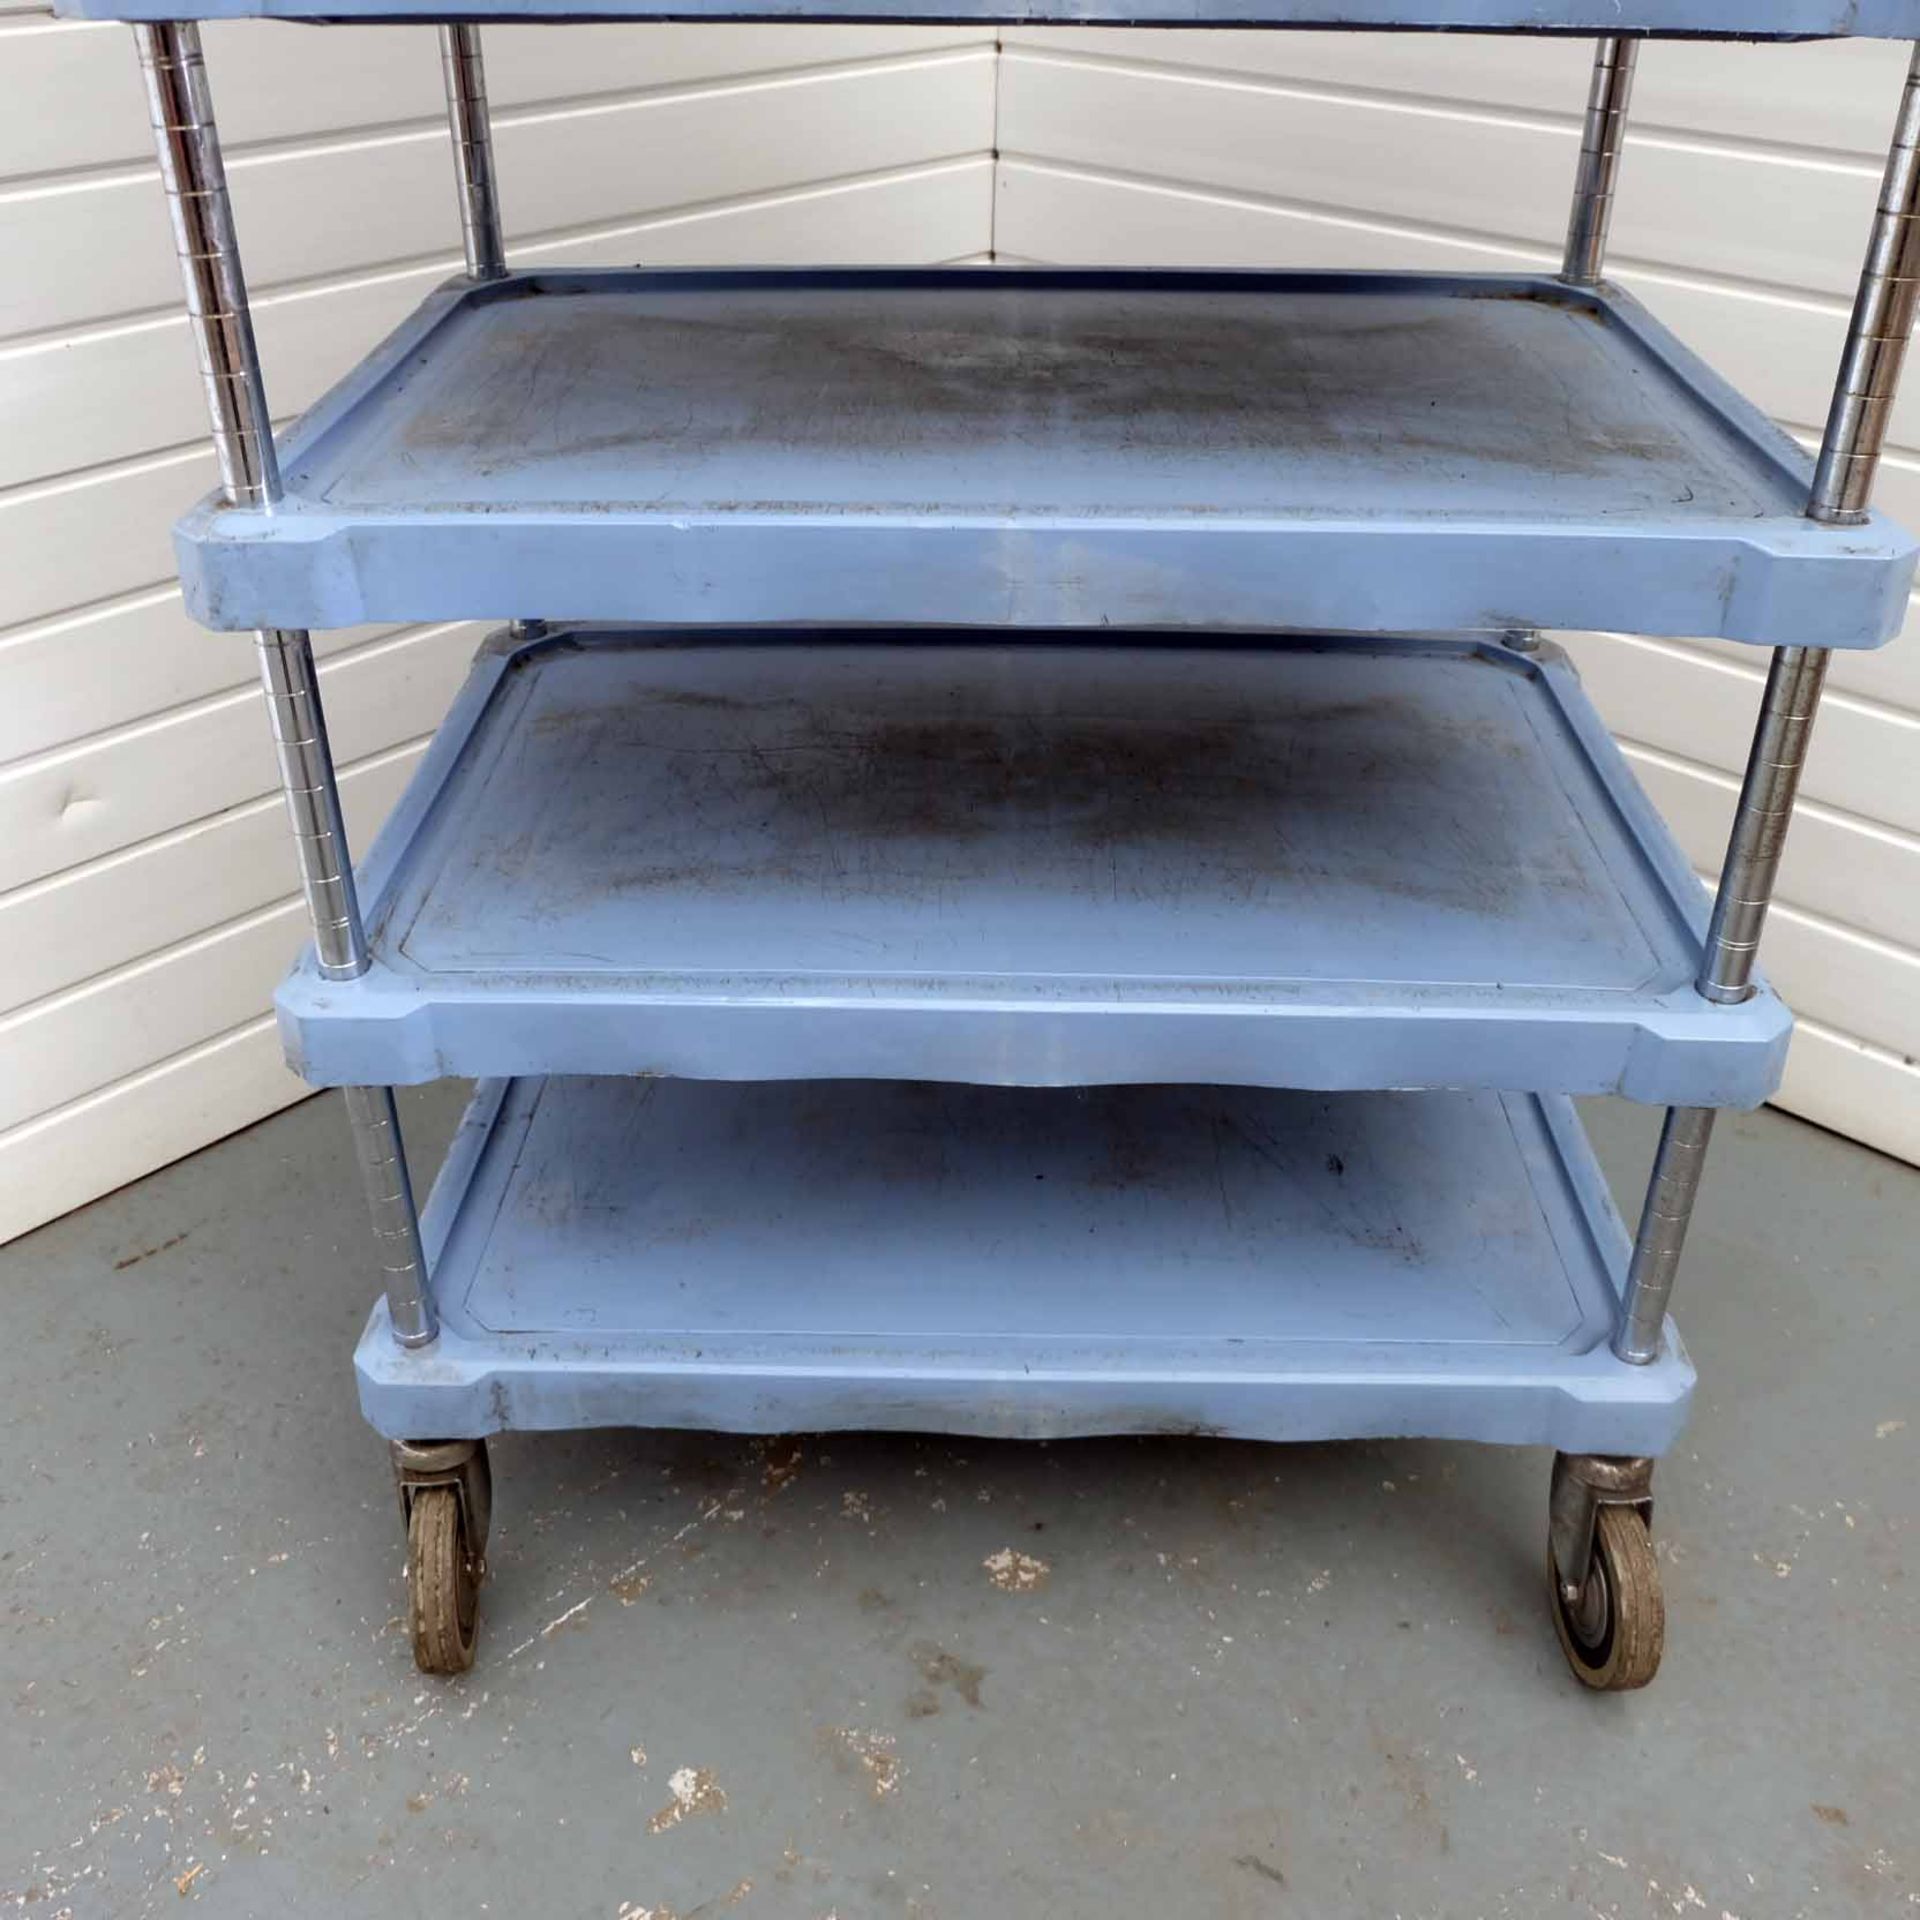 Parts Trolley With 6 Shelves. Size 795mm x 540mm x 1525mm High. - Image 4 of 4